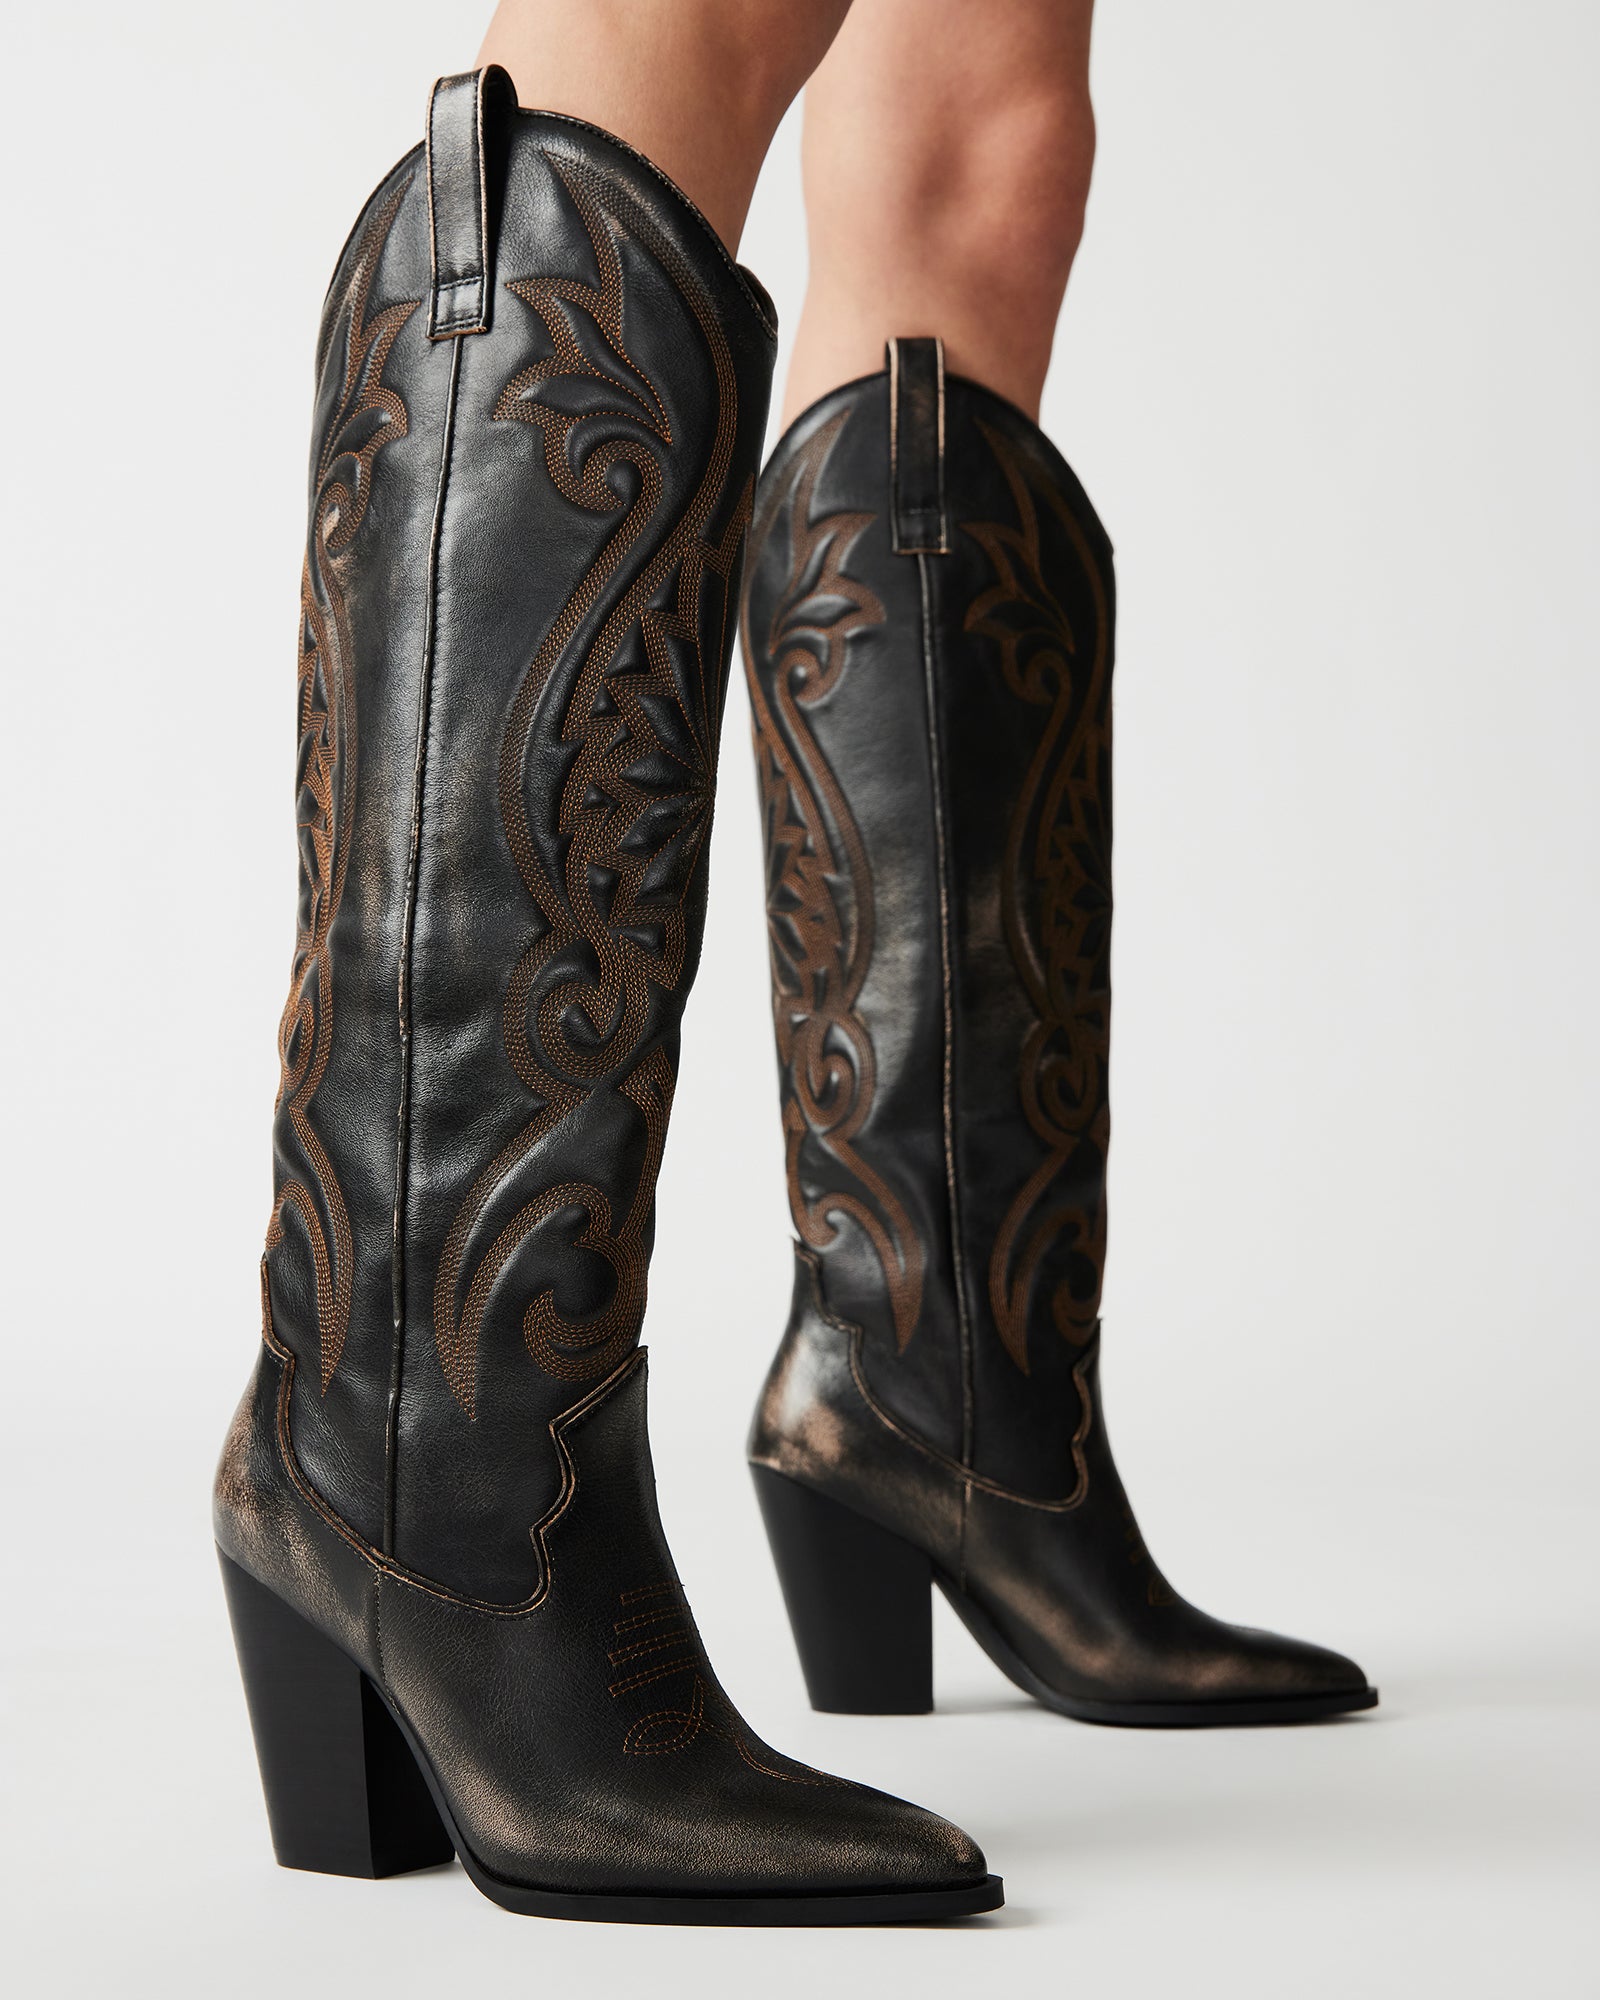 LASSO Brown Distressed Western Boot | Women's Boots – Steve Madden